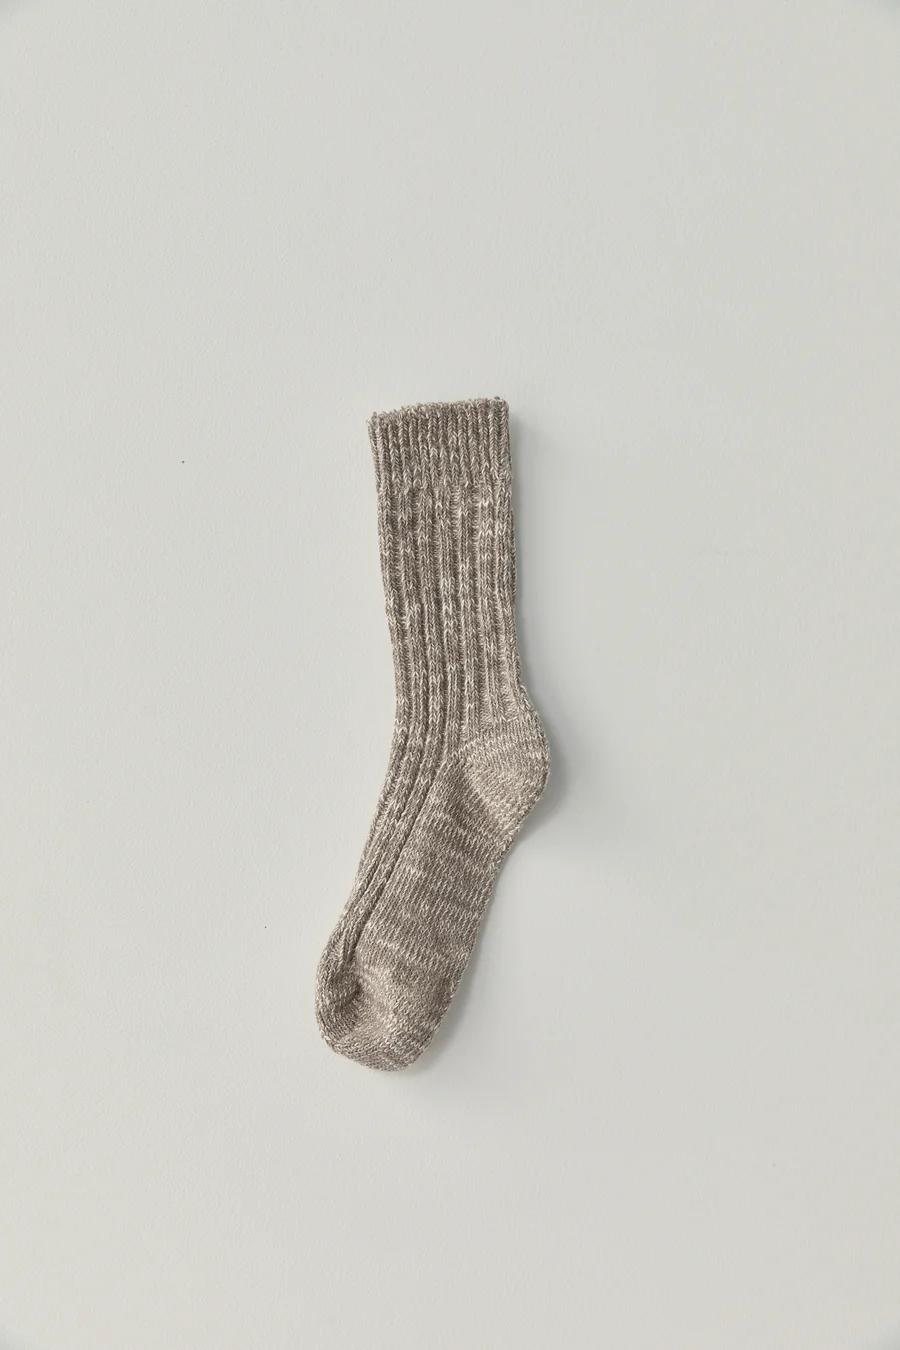 Product Image for The Woven Sock, Fog